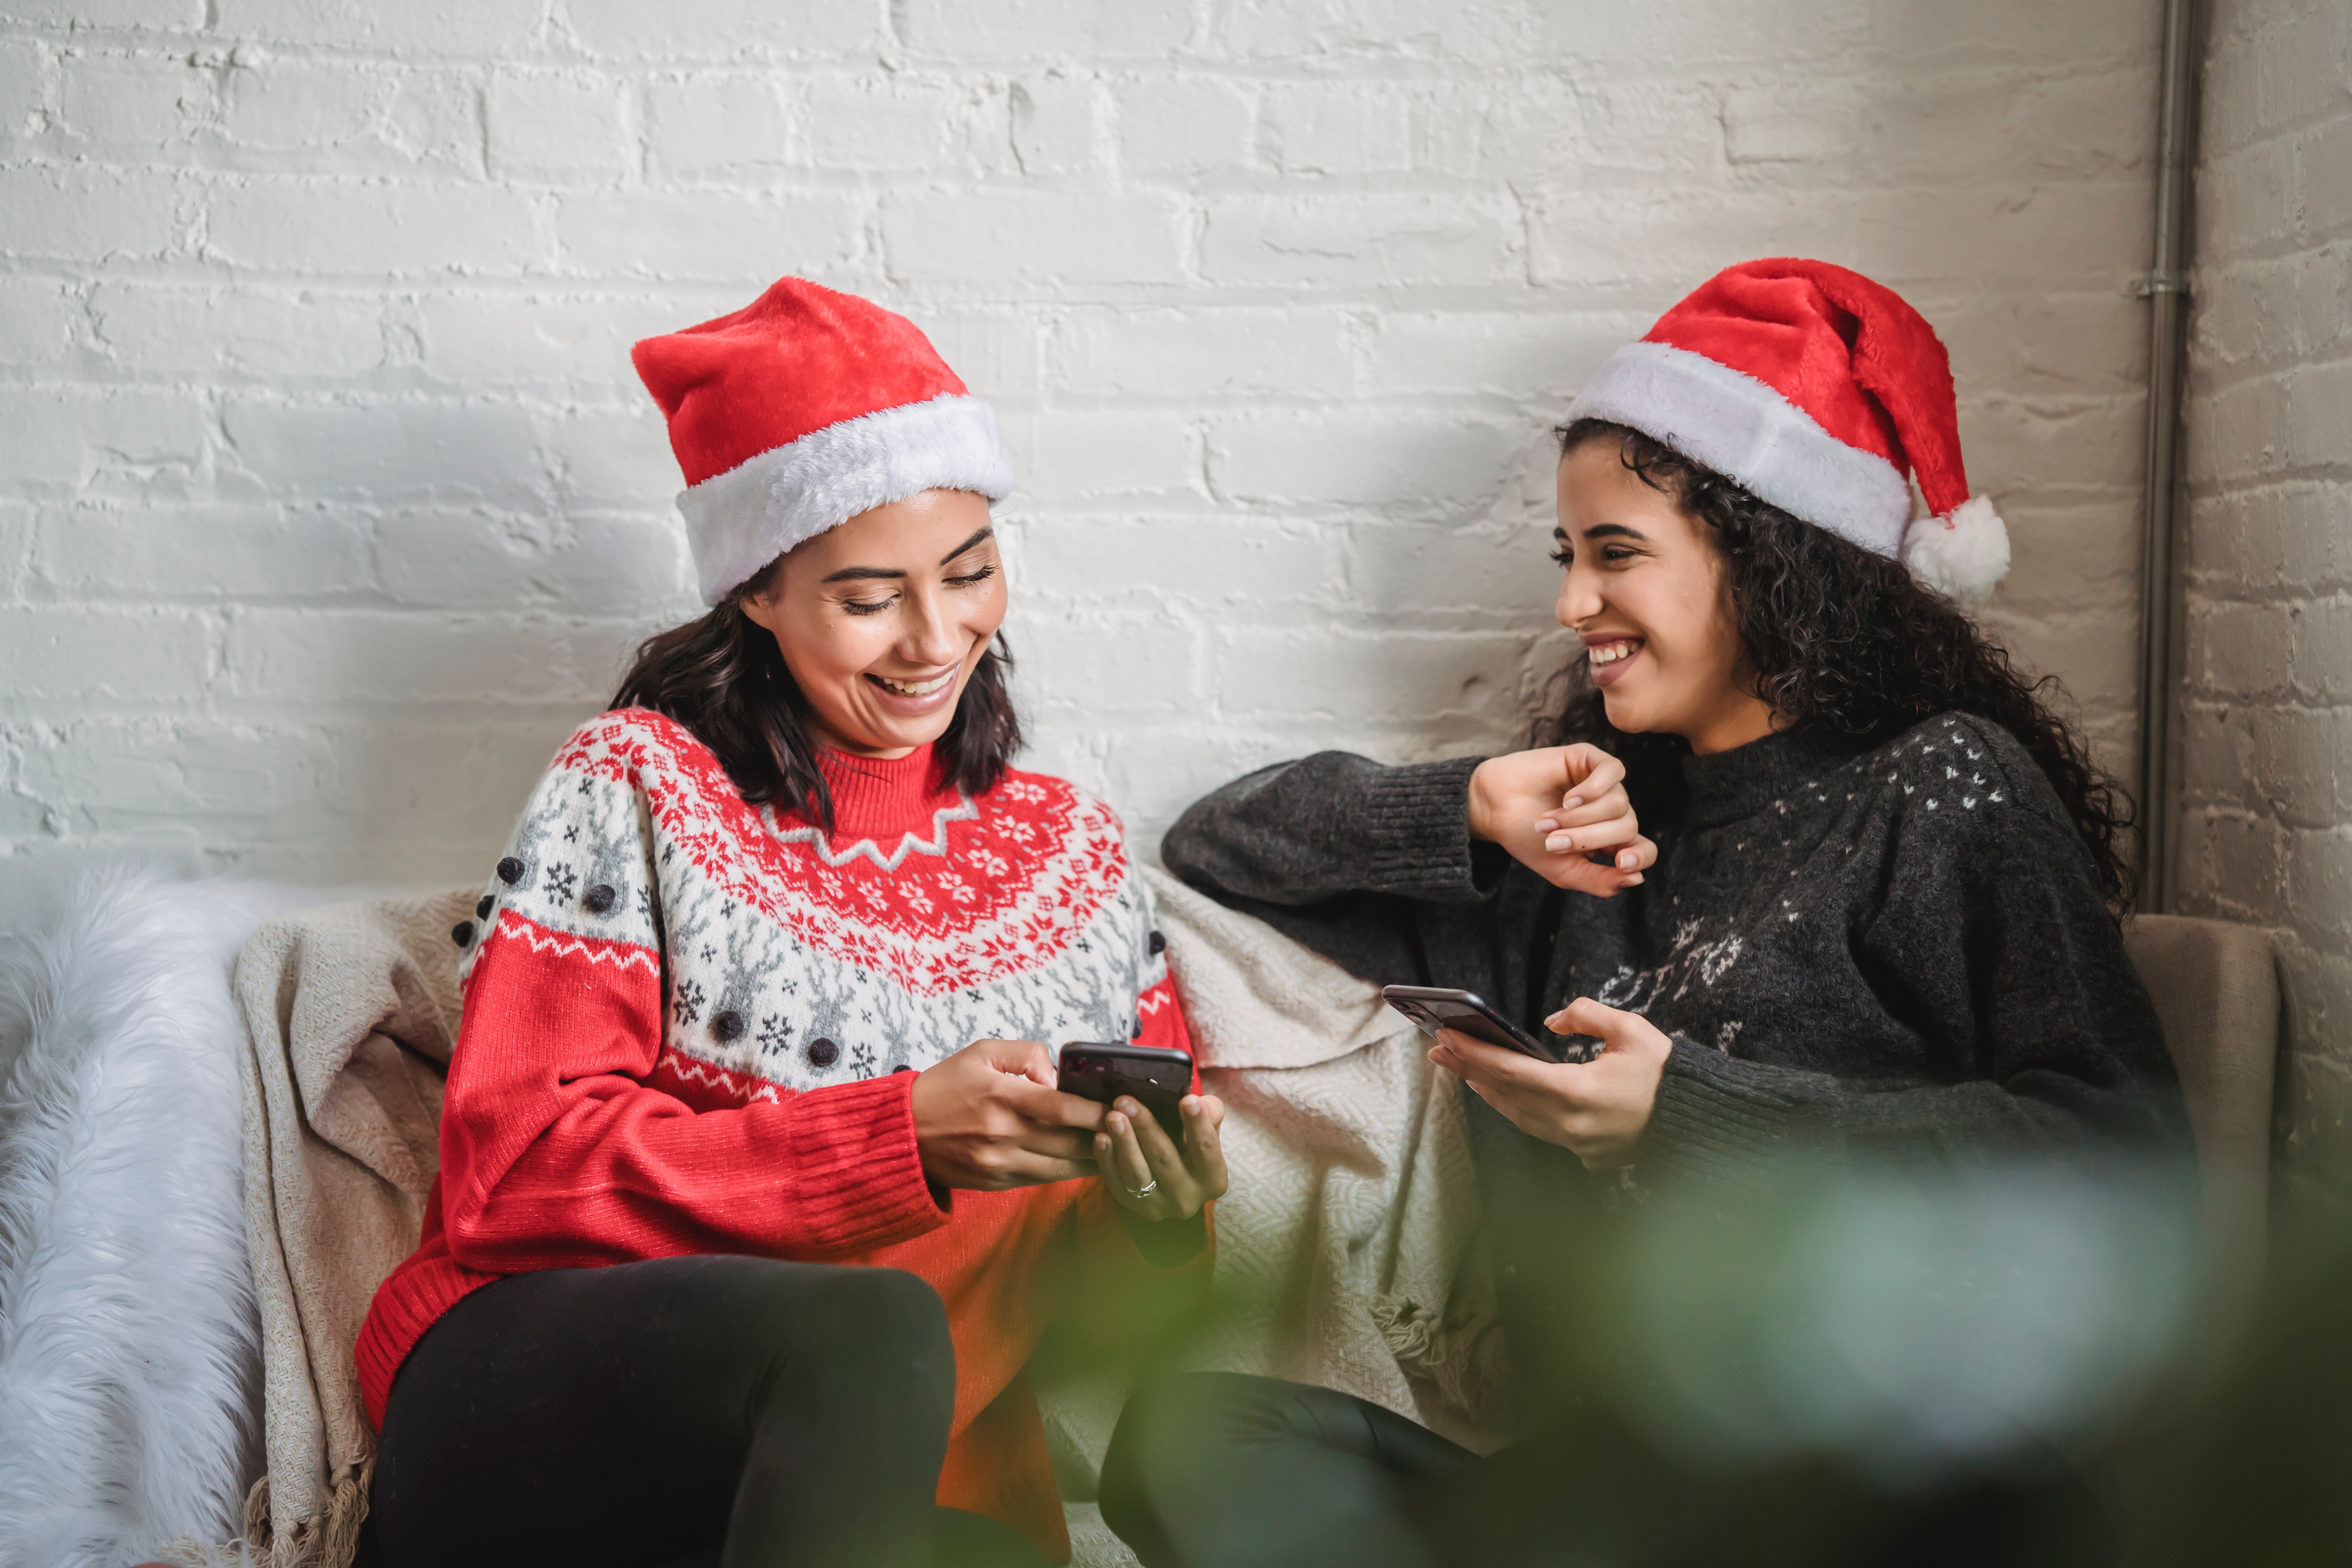 Two women wearing festive outfits and chatting